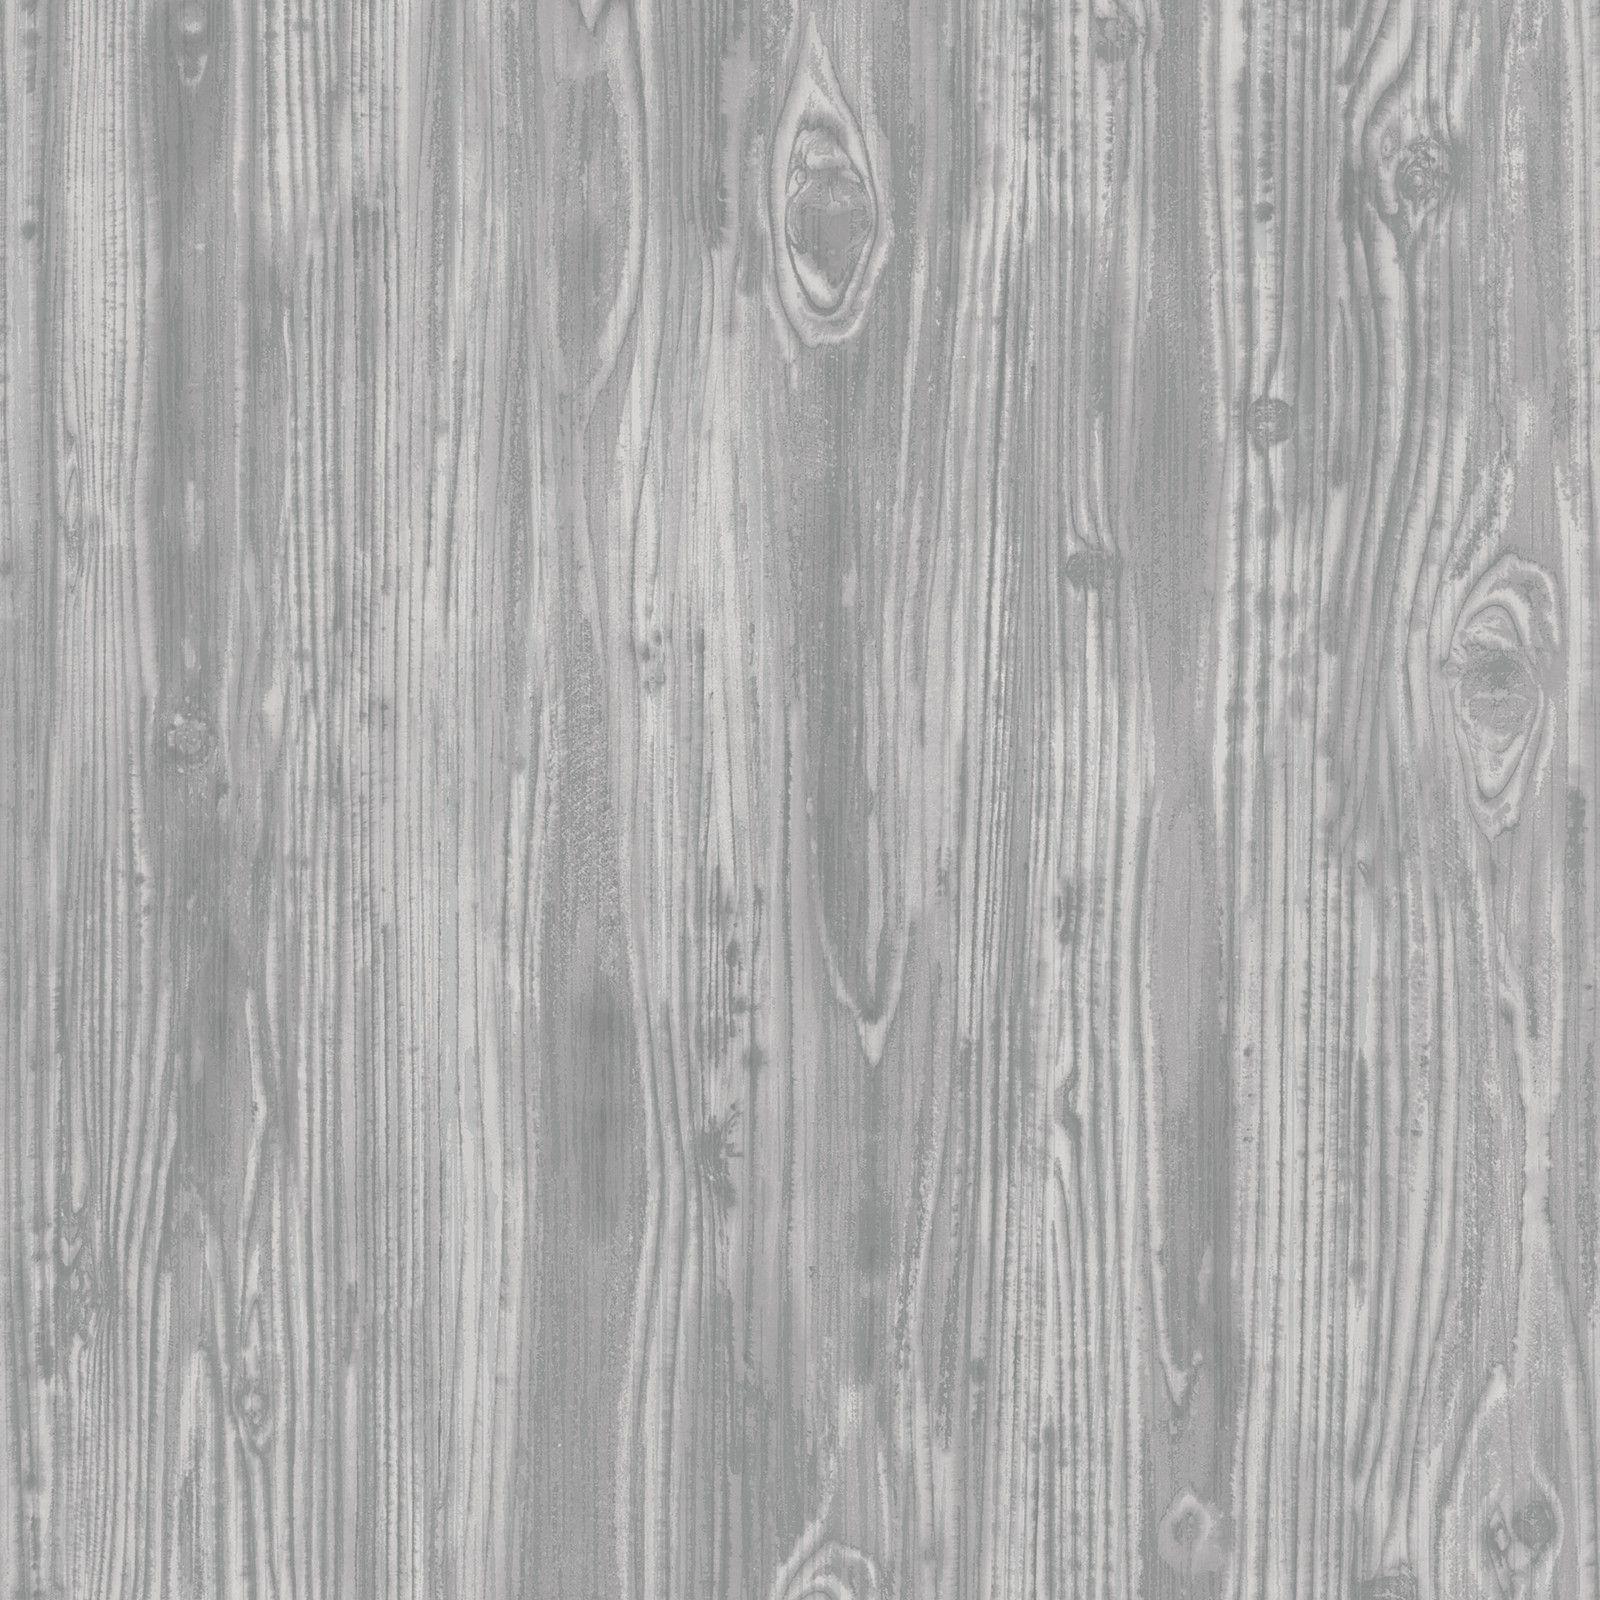 Gray Wood Texture Wallpapers - Top Free Gray Wood Texture Backgrounds